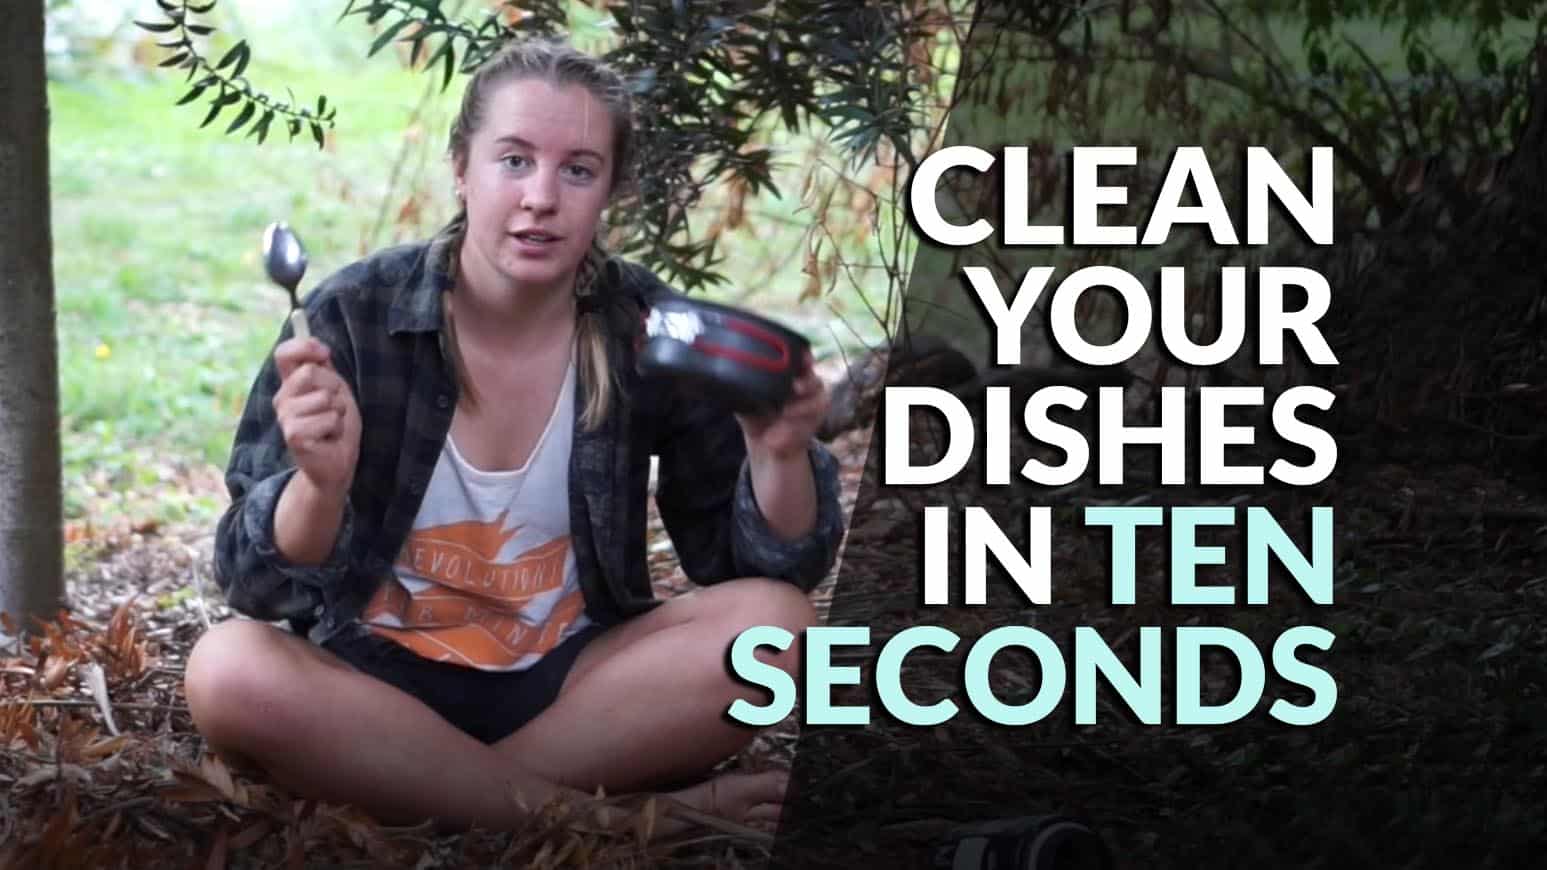 Clean your dishes in 10 seconds